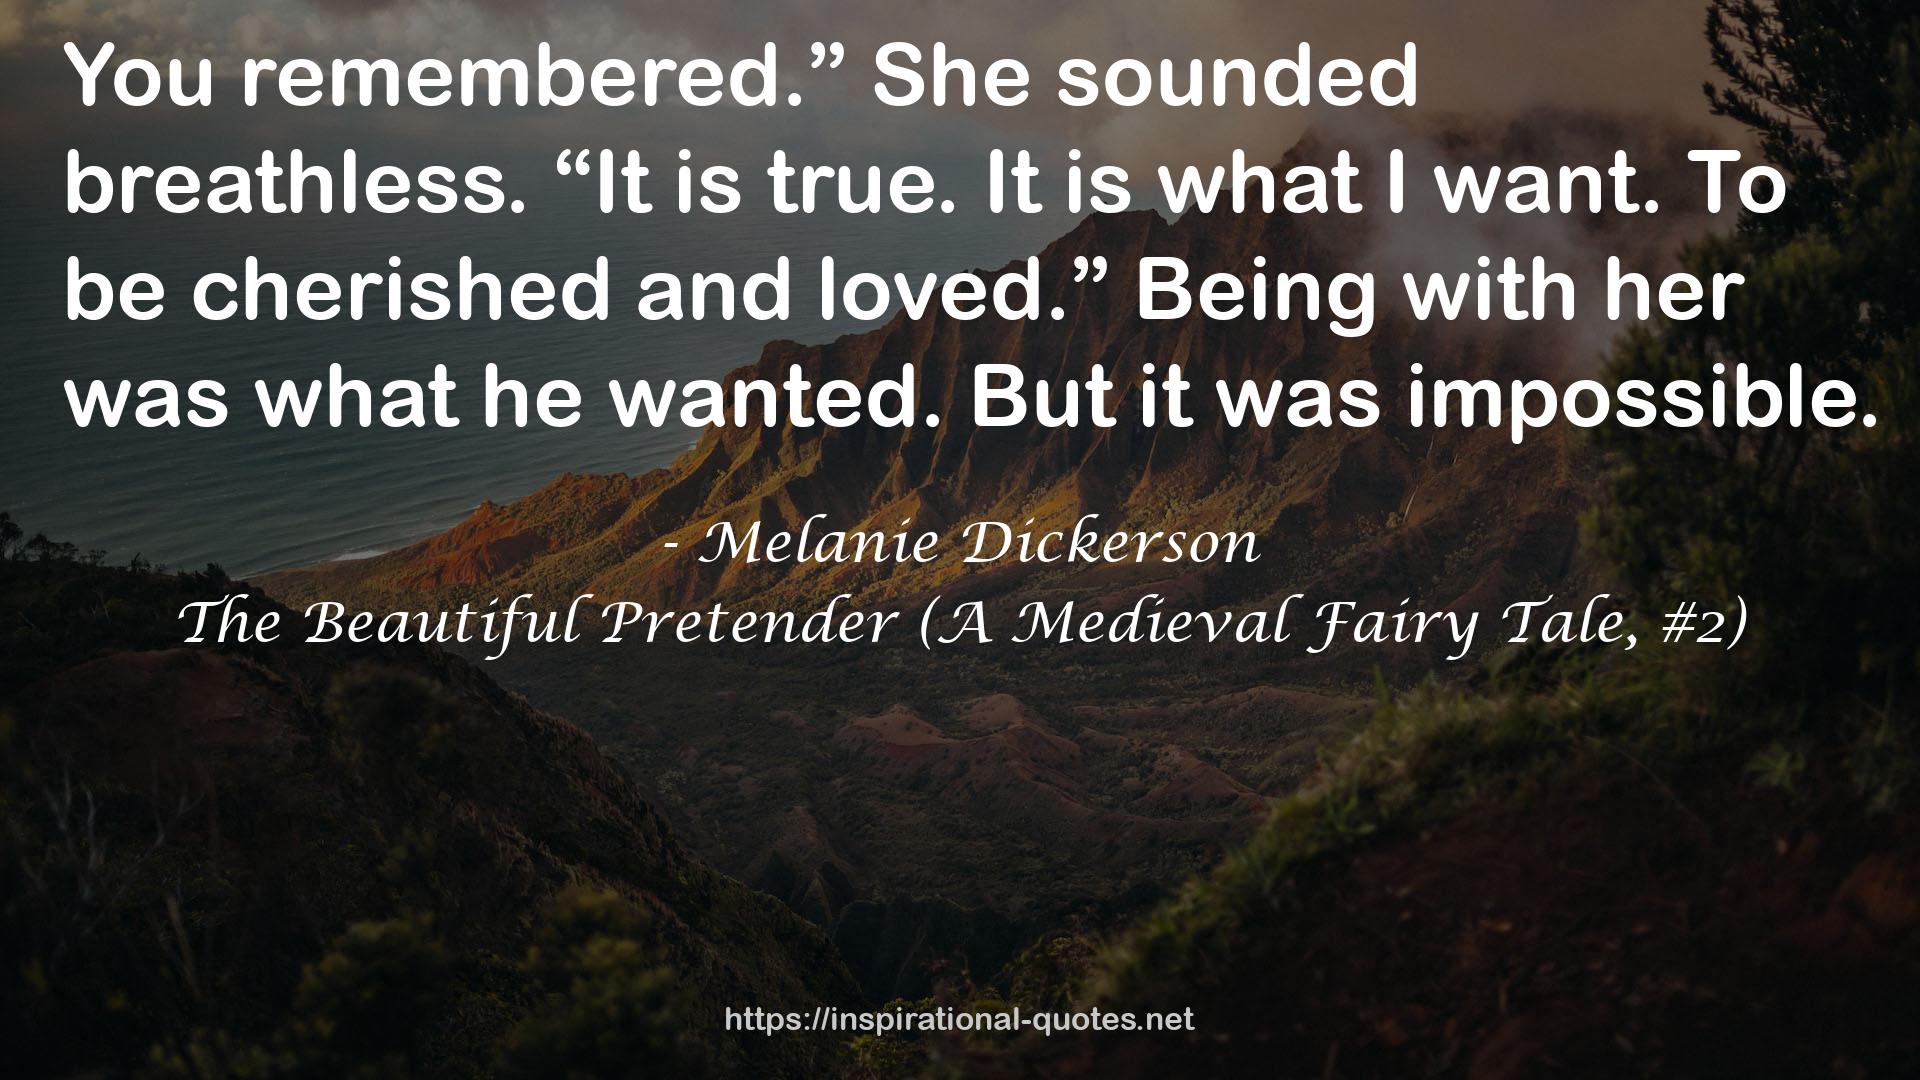 The Beautiful Pretender (A Medieval Fairy Tale, #2) QUOTES